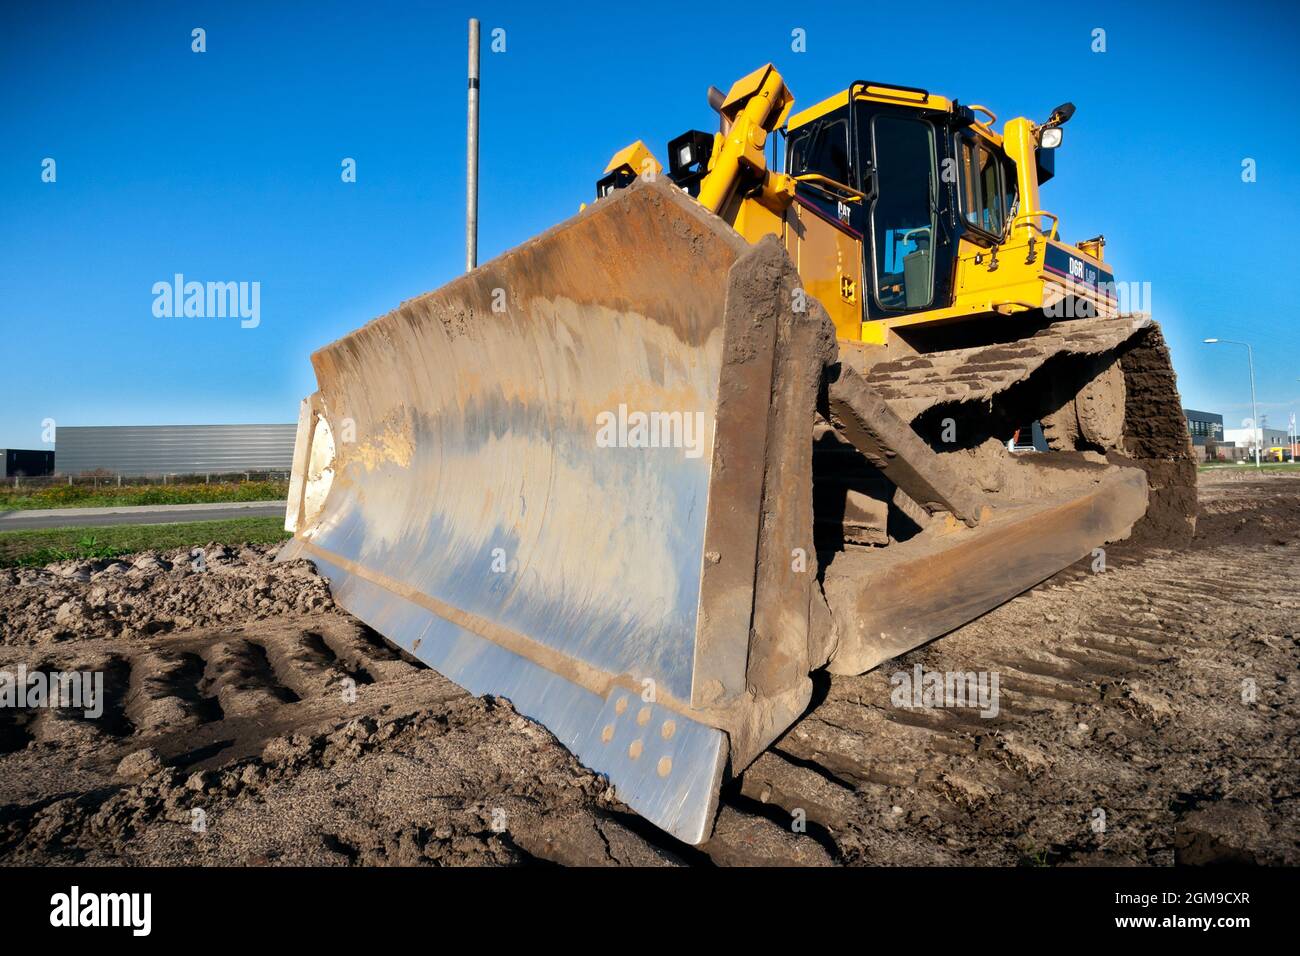 Caterpillar D6 bulldozer at a construction site in The Netherlands. October 9, 2010 Stock Photo